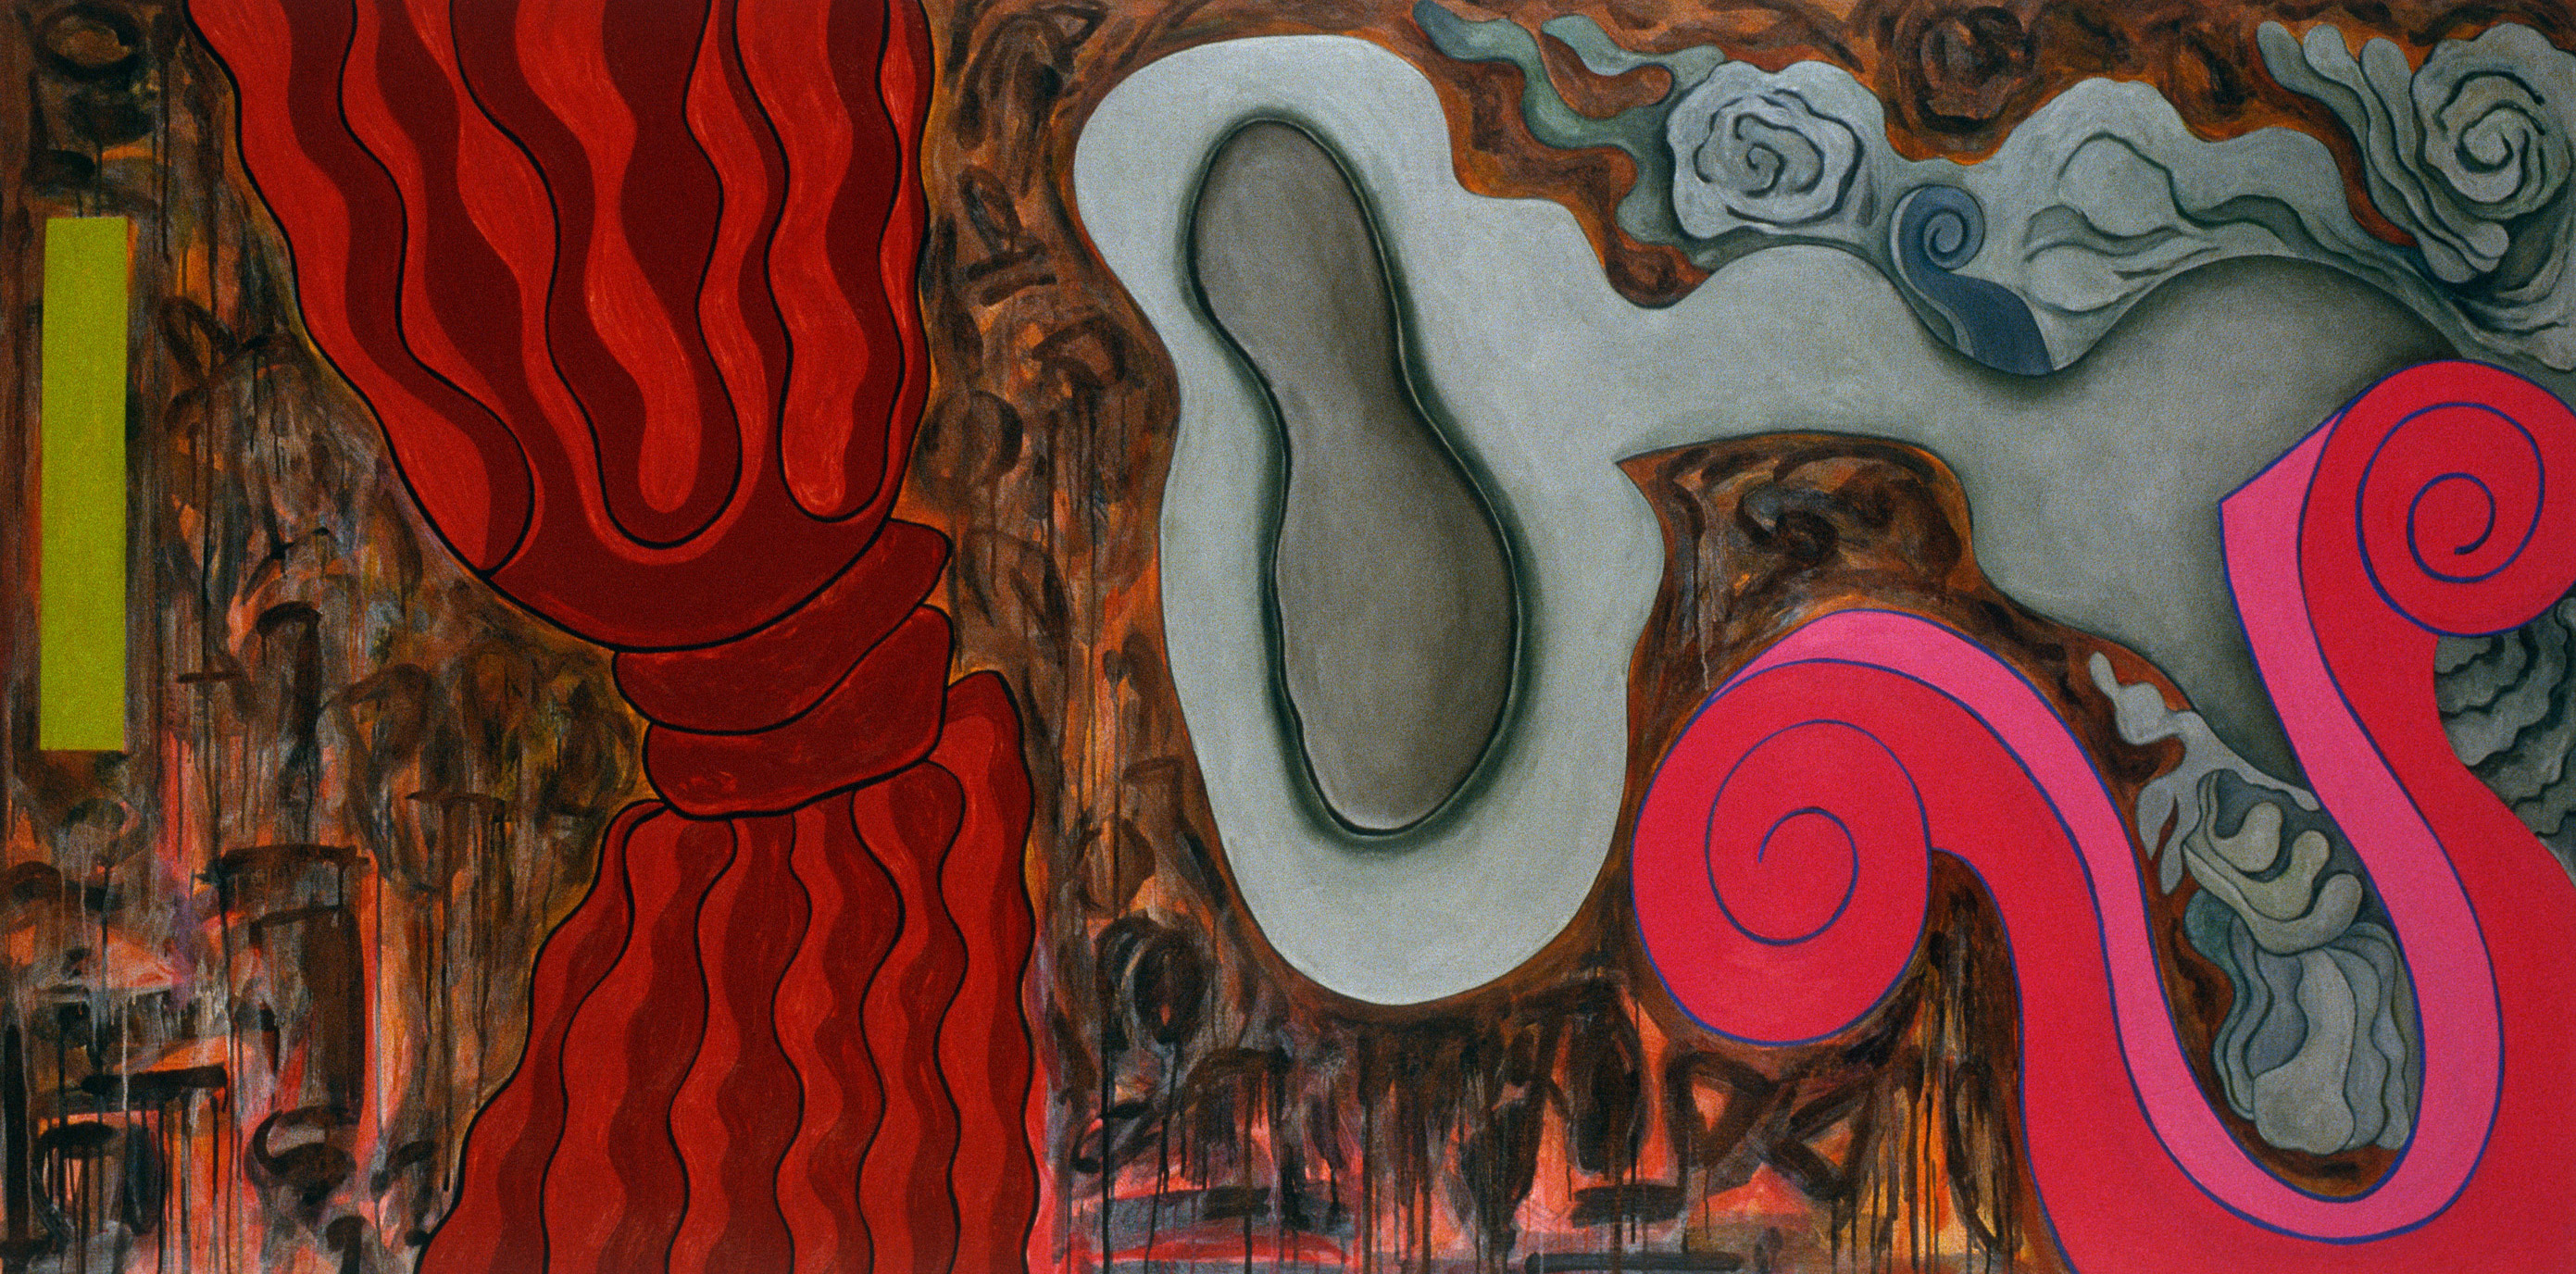 Still Pictures No.2, 1993 | 48” x 96” | Oil & Acrylic on Canvas